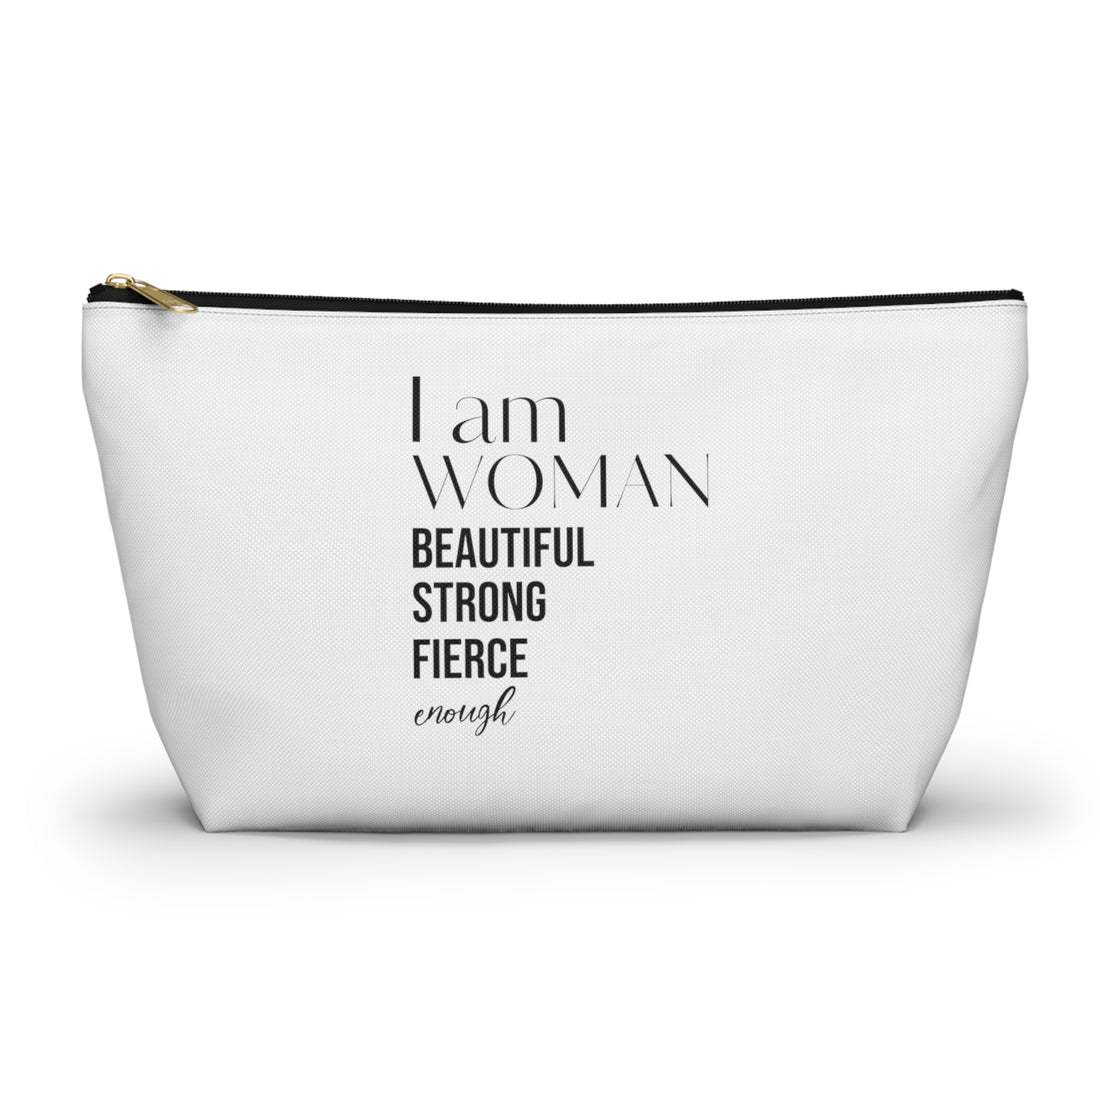 I am Woman Accessory Pouch